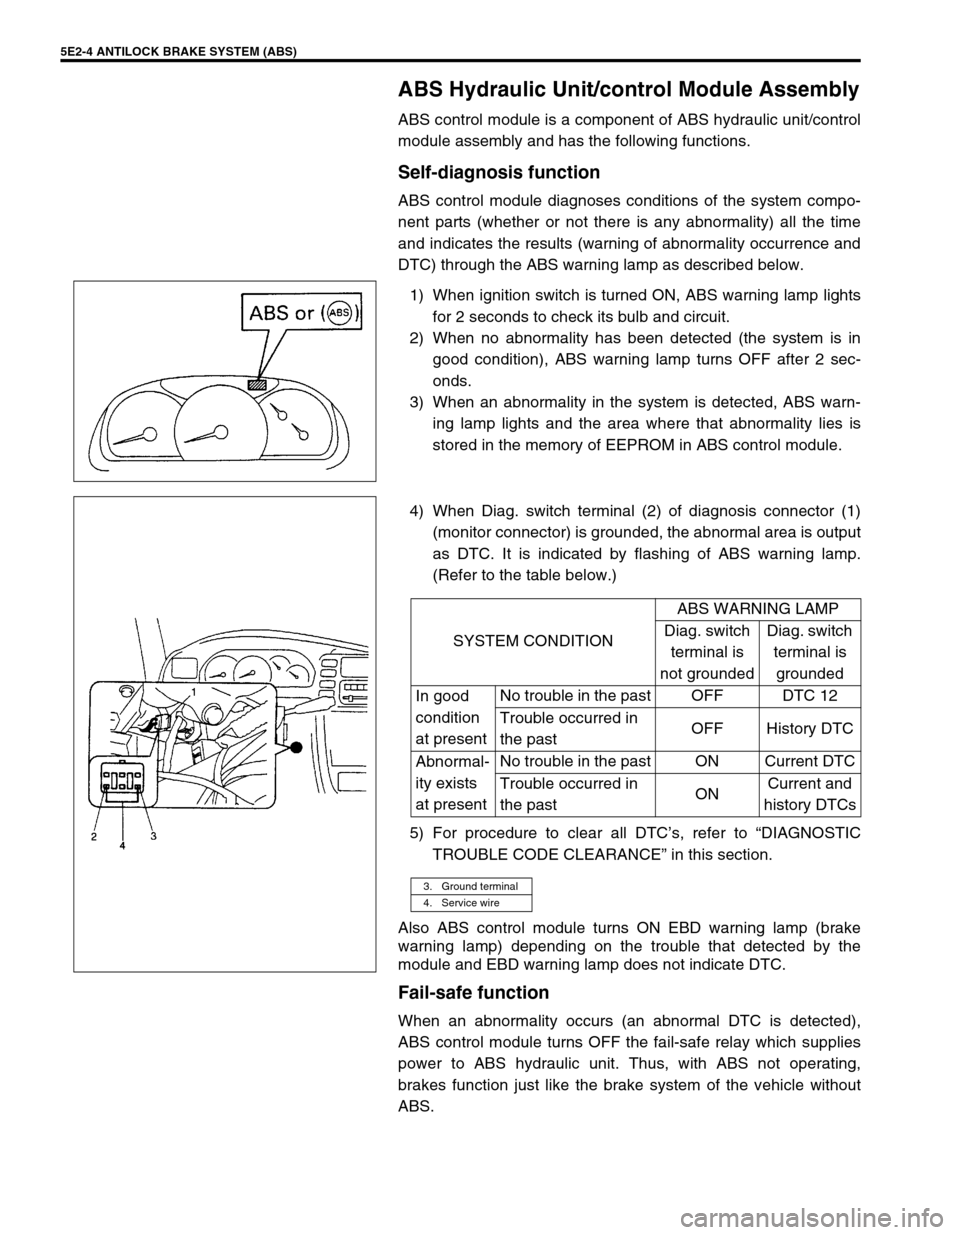 SUZUKI GRAND VITARA 2001 2.G Owners Manual 5E2-4 ANTILOCK BRAKE SYSTEM (ABS)
ABS Hydraulic Unit/control Module Assembly
ABS control module is a component of ABS hydraulic unit/control
module assembly and has the following functions.
Self-diagn